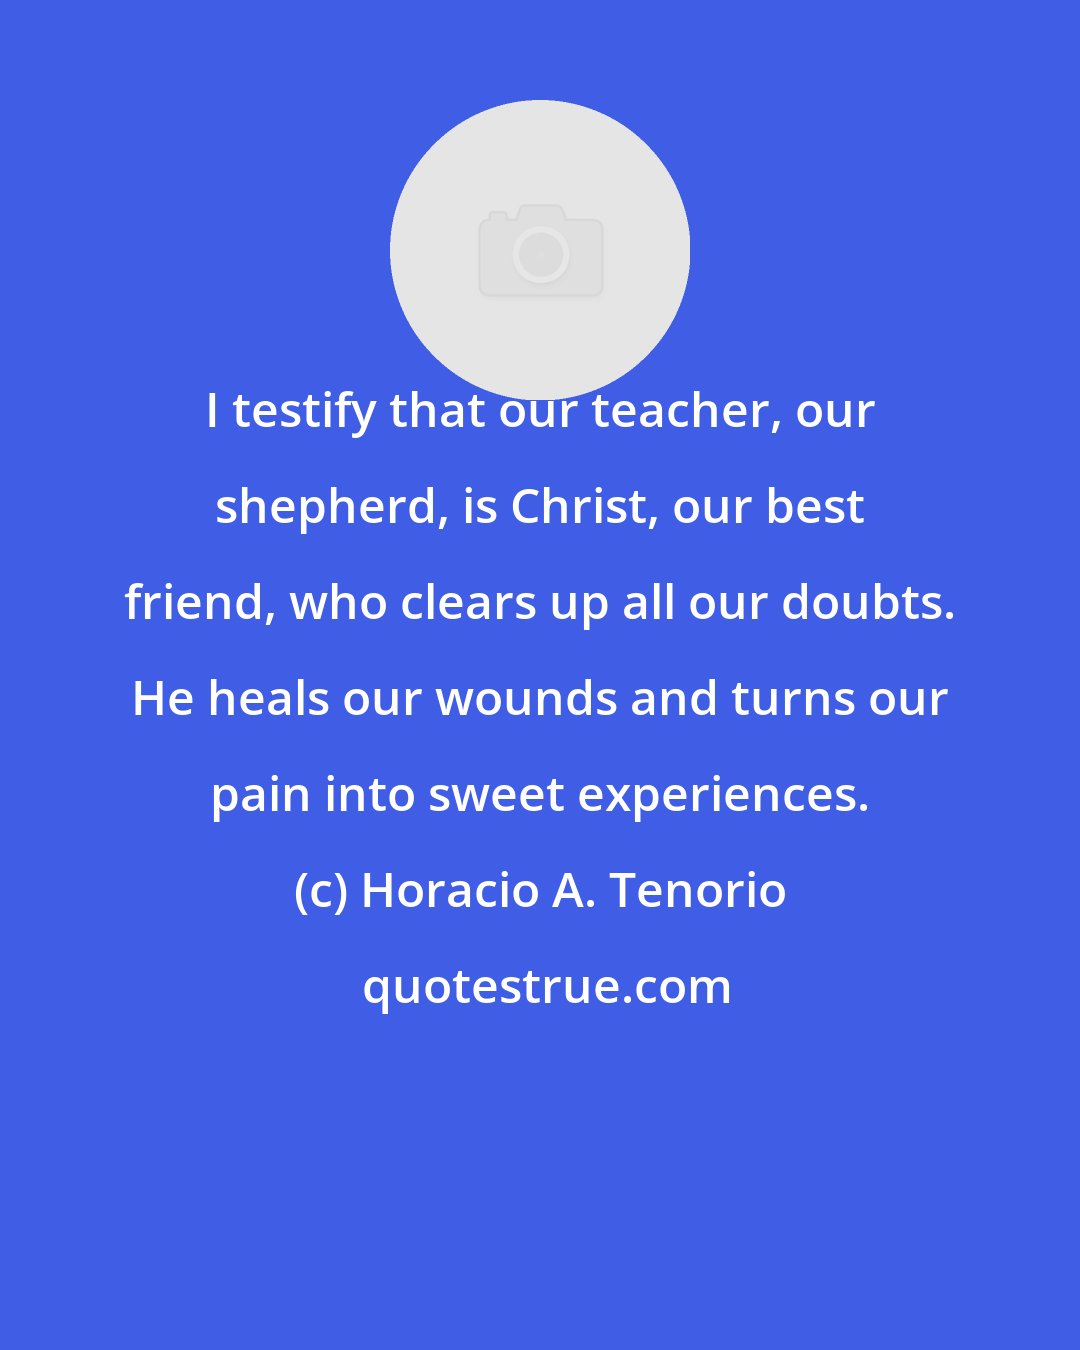 Horacio A. Tenorio: I testify that our teacher, our shepherd, is Christ, our best friend, who clears up all our doubts. He heals our wounds and turns our pain into sweet experiences.